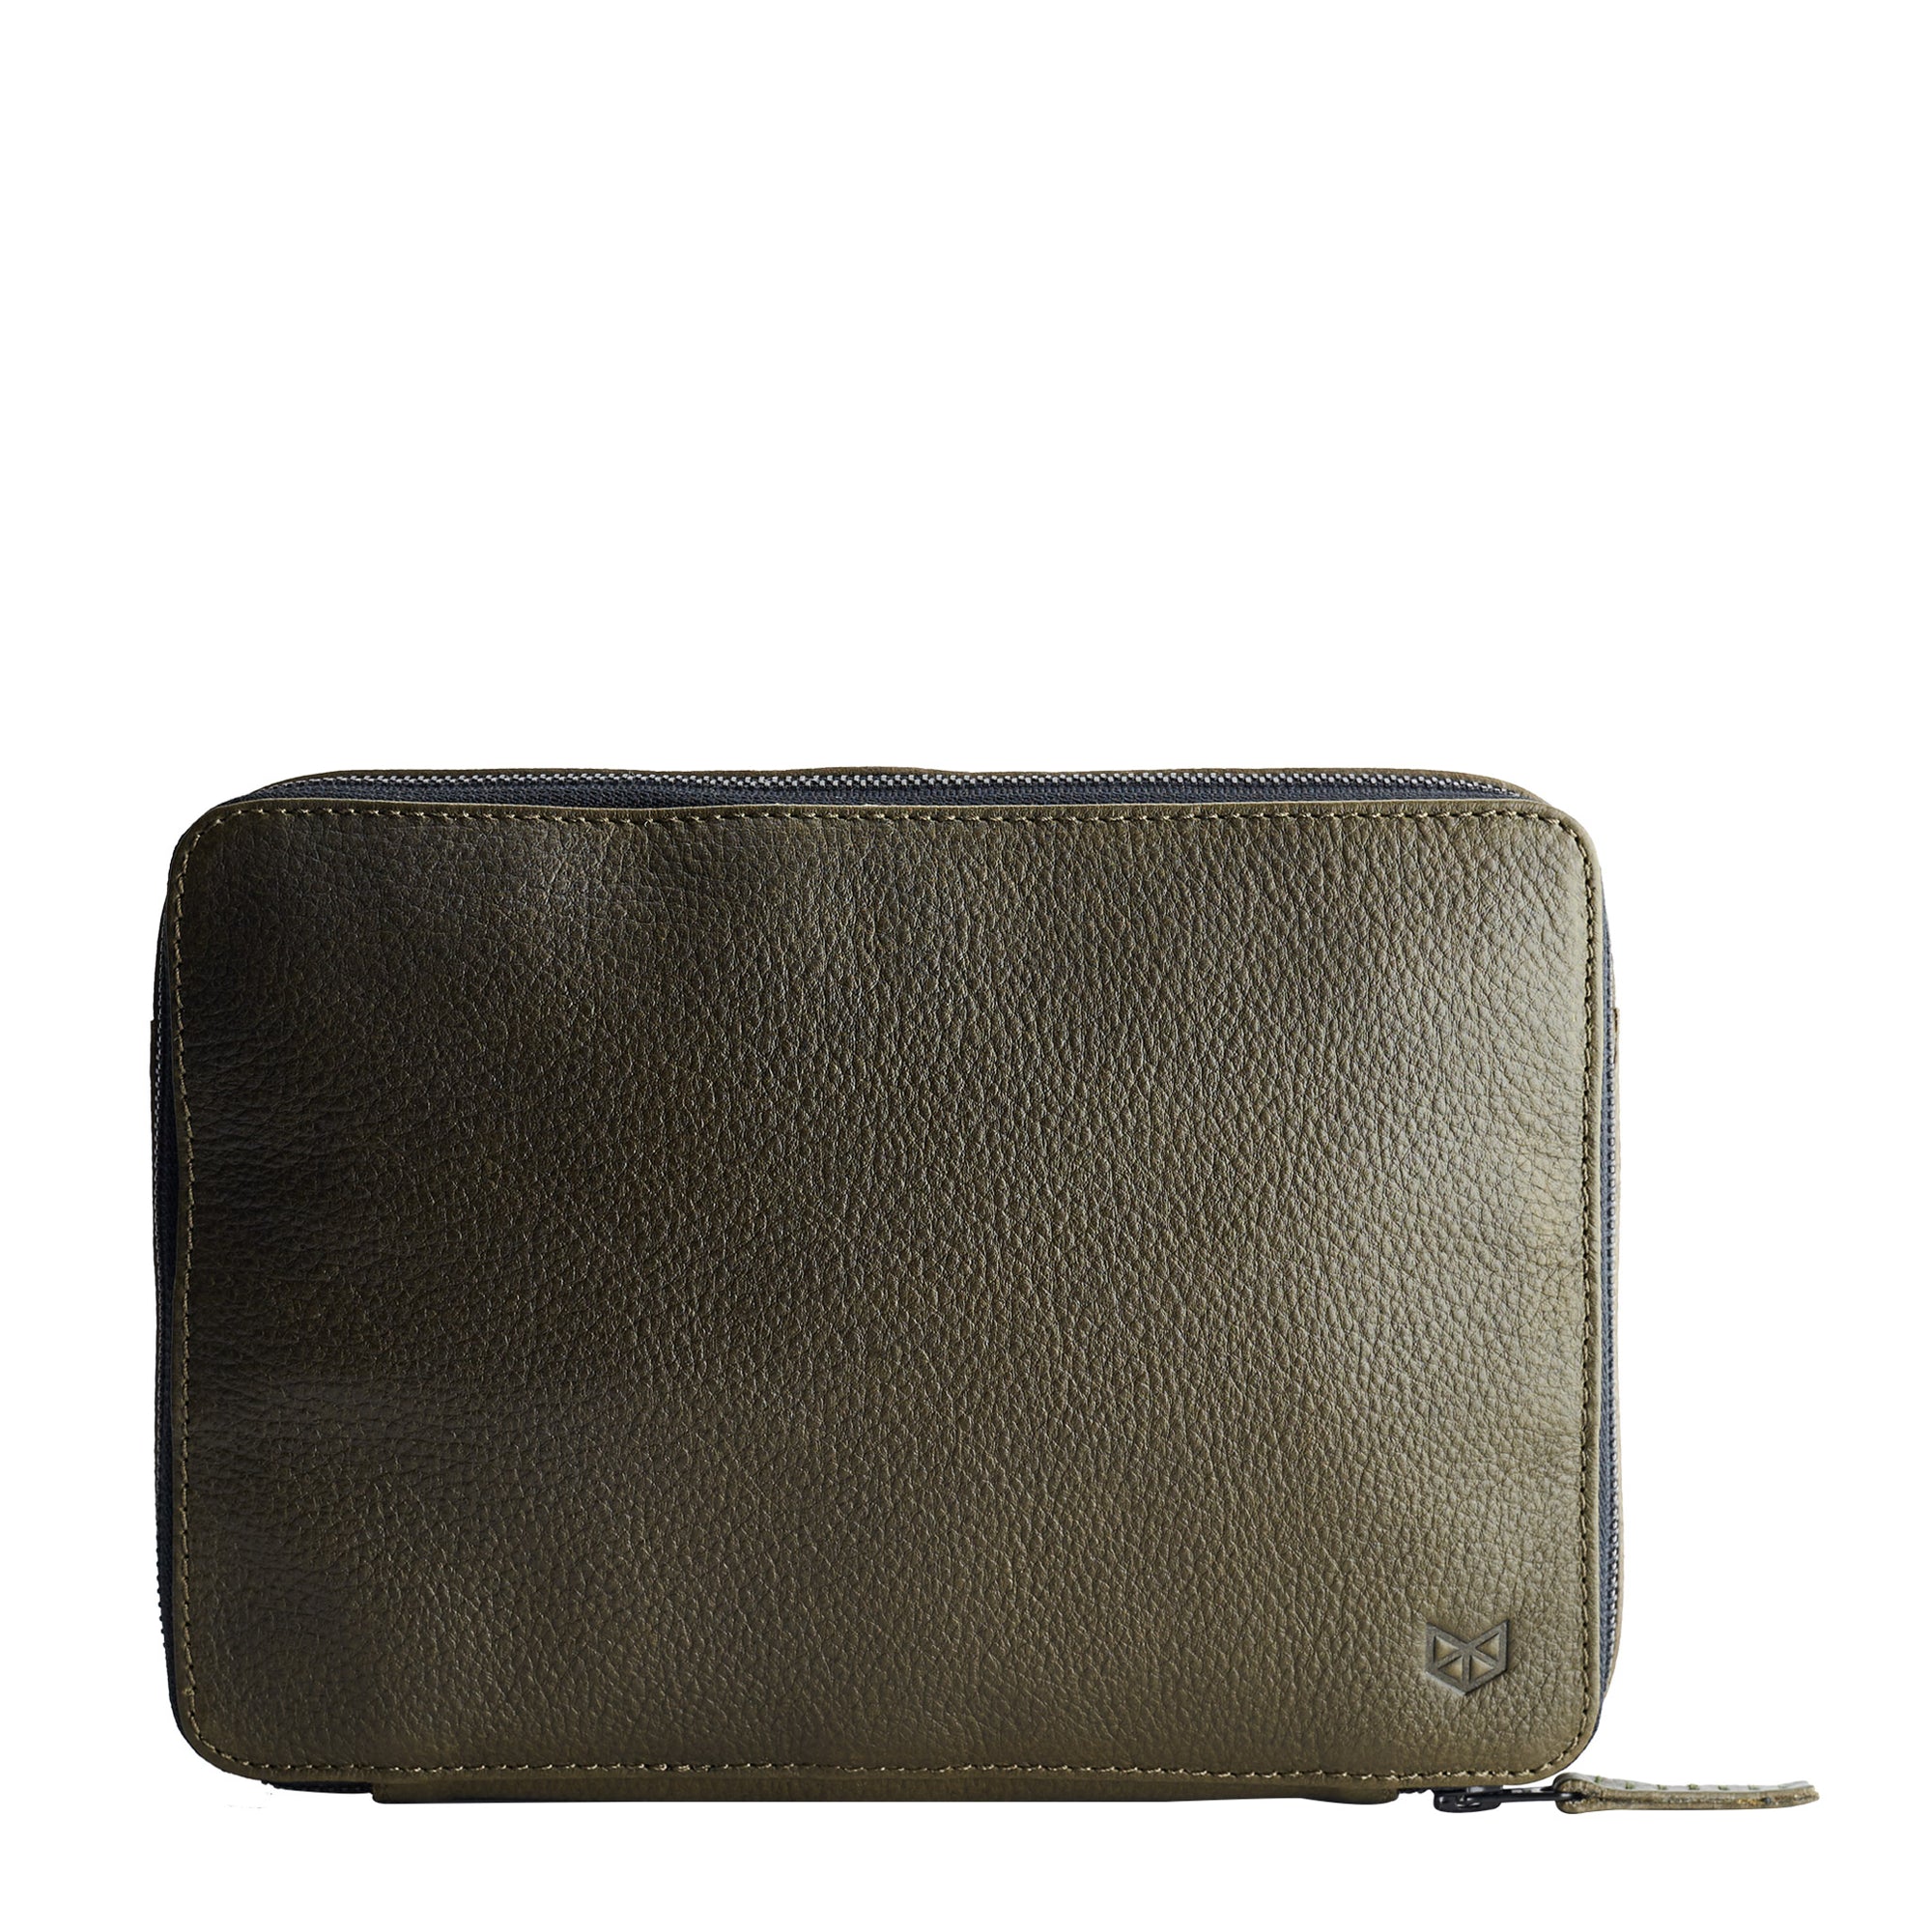 Green leather EDC bag essentials by Capra. Fits iPad Pro with Apple pencil.